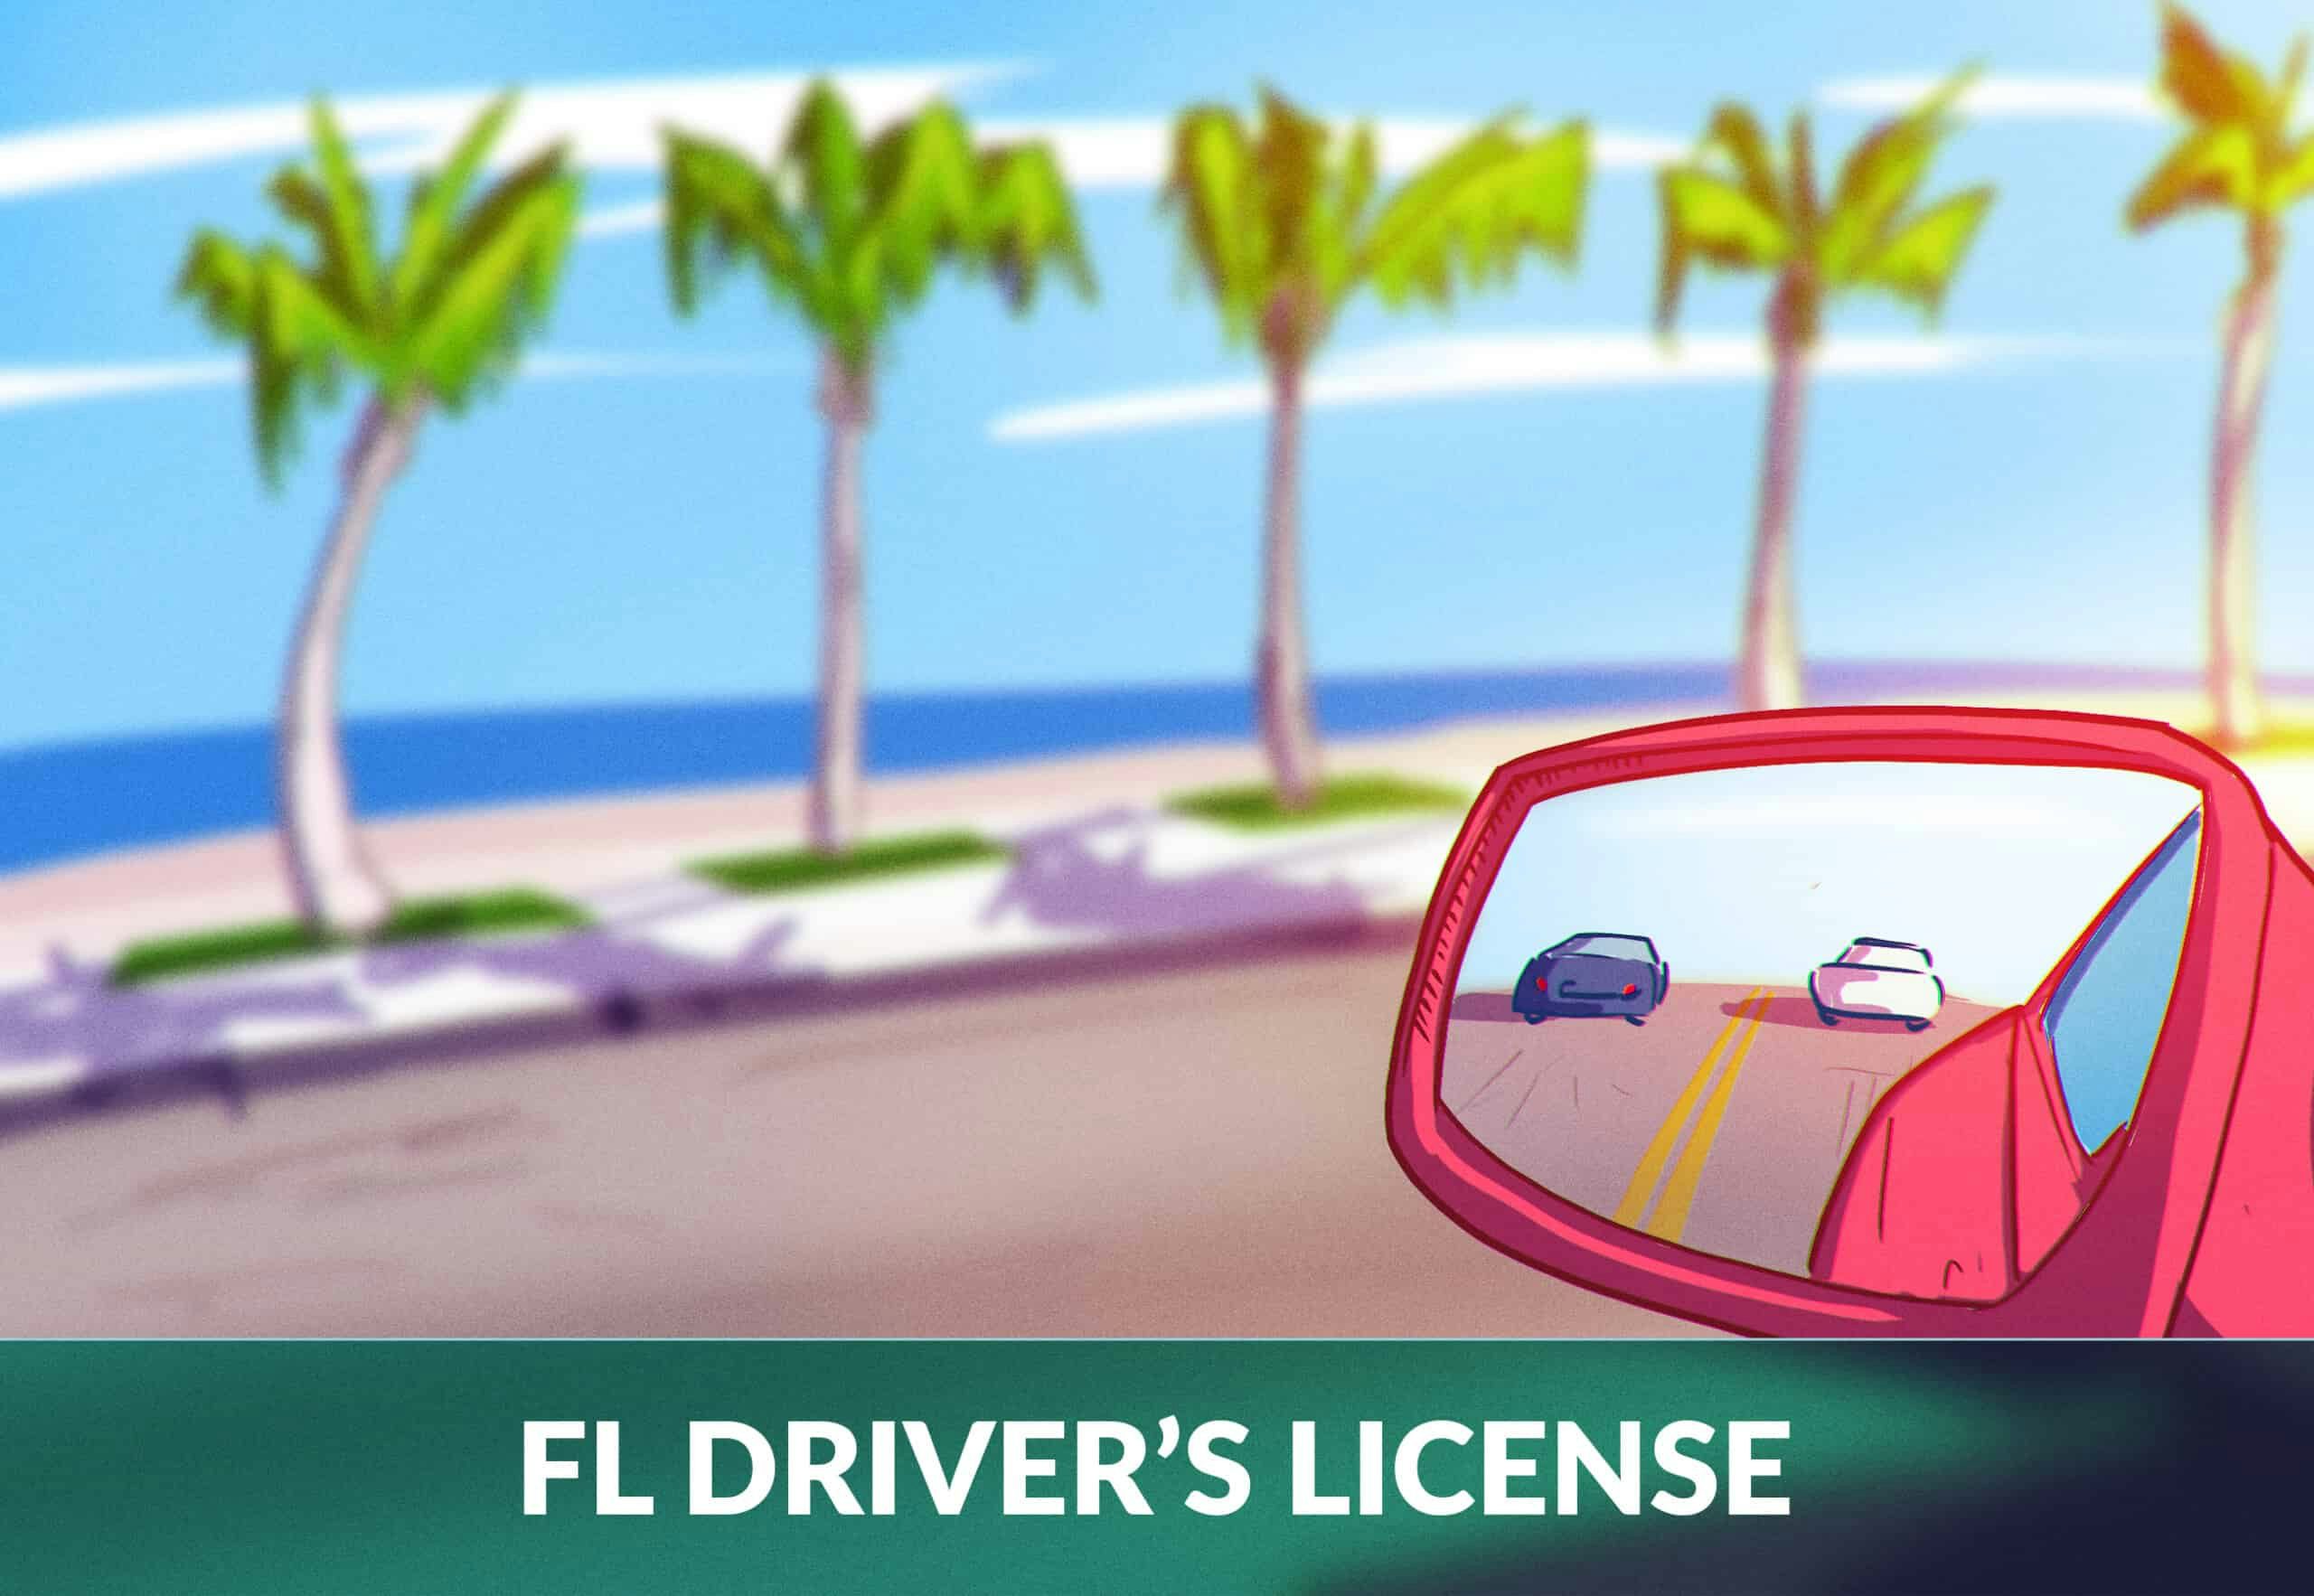 How to get a driver's license florida